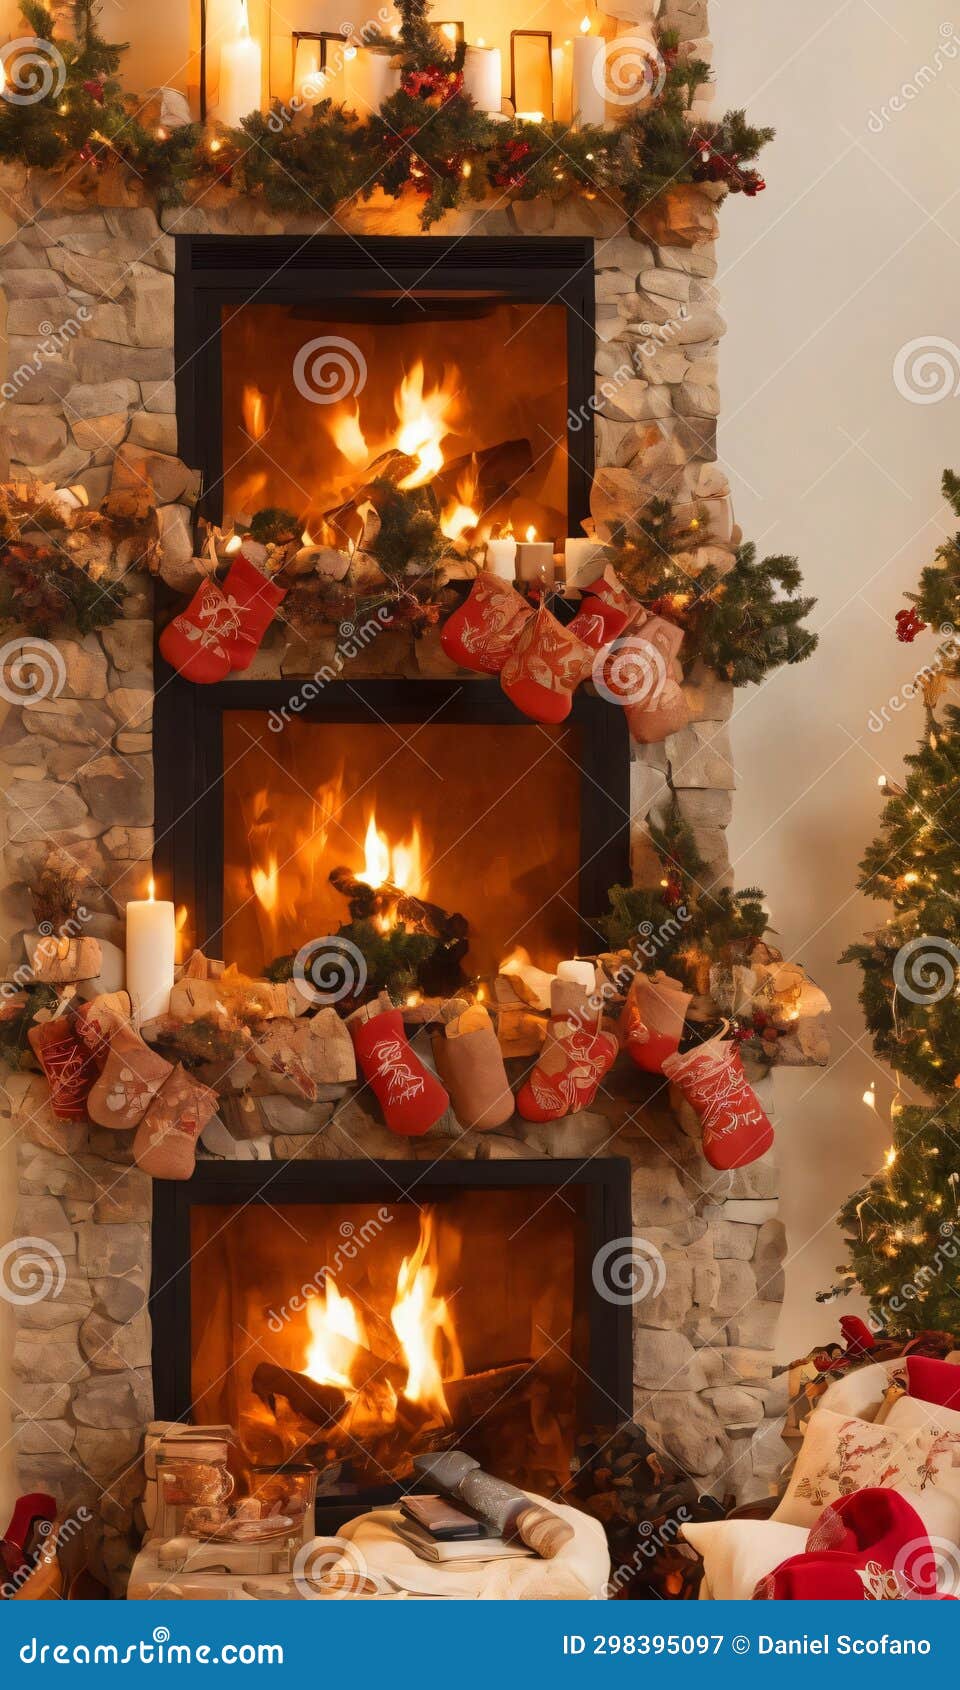 A Cozy Fireplace With Stockings Illuminated By The Soft Glow Of